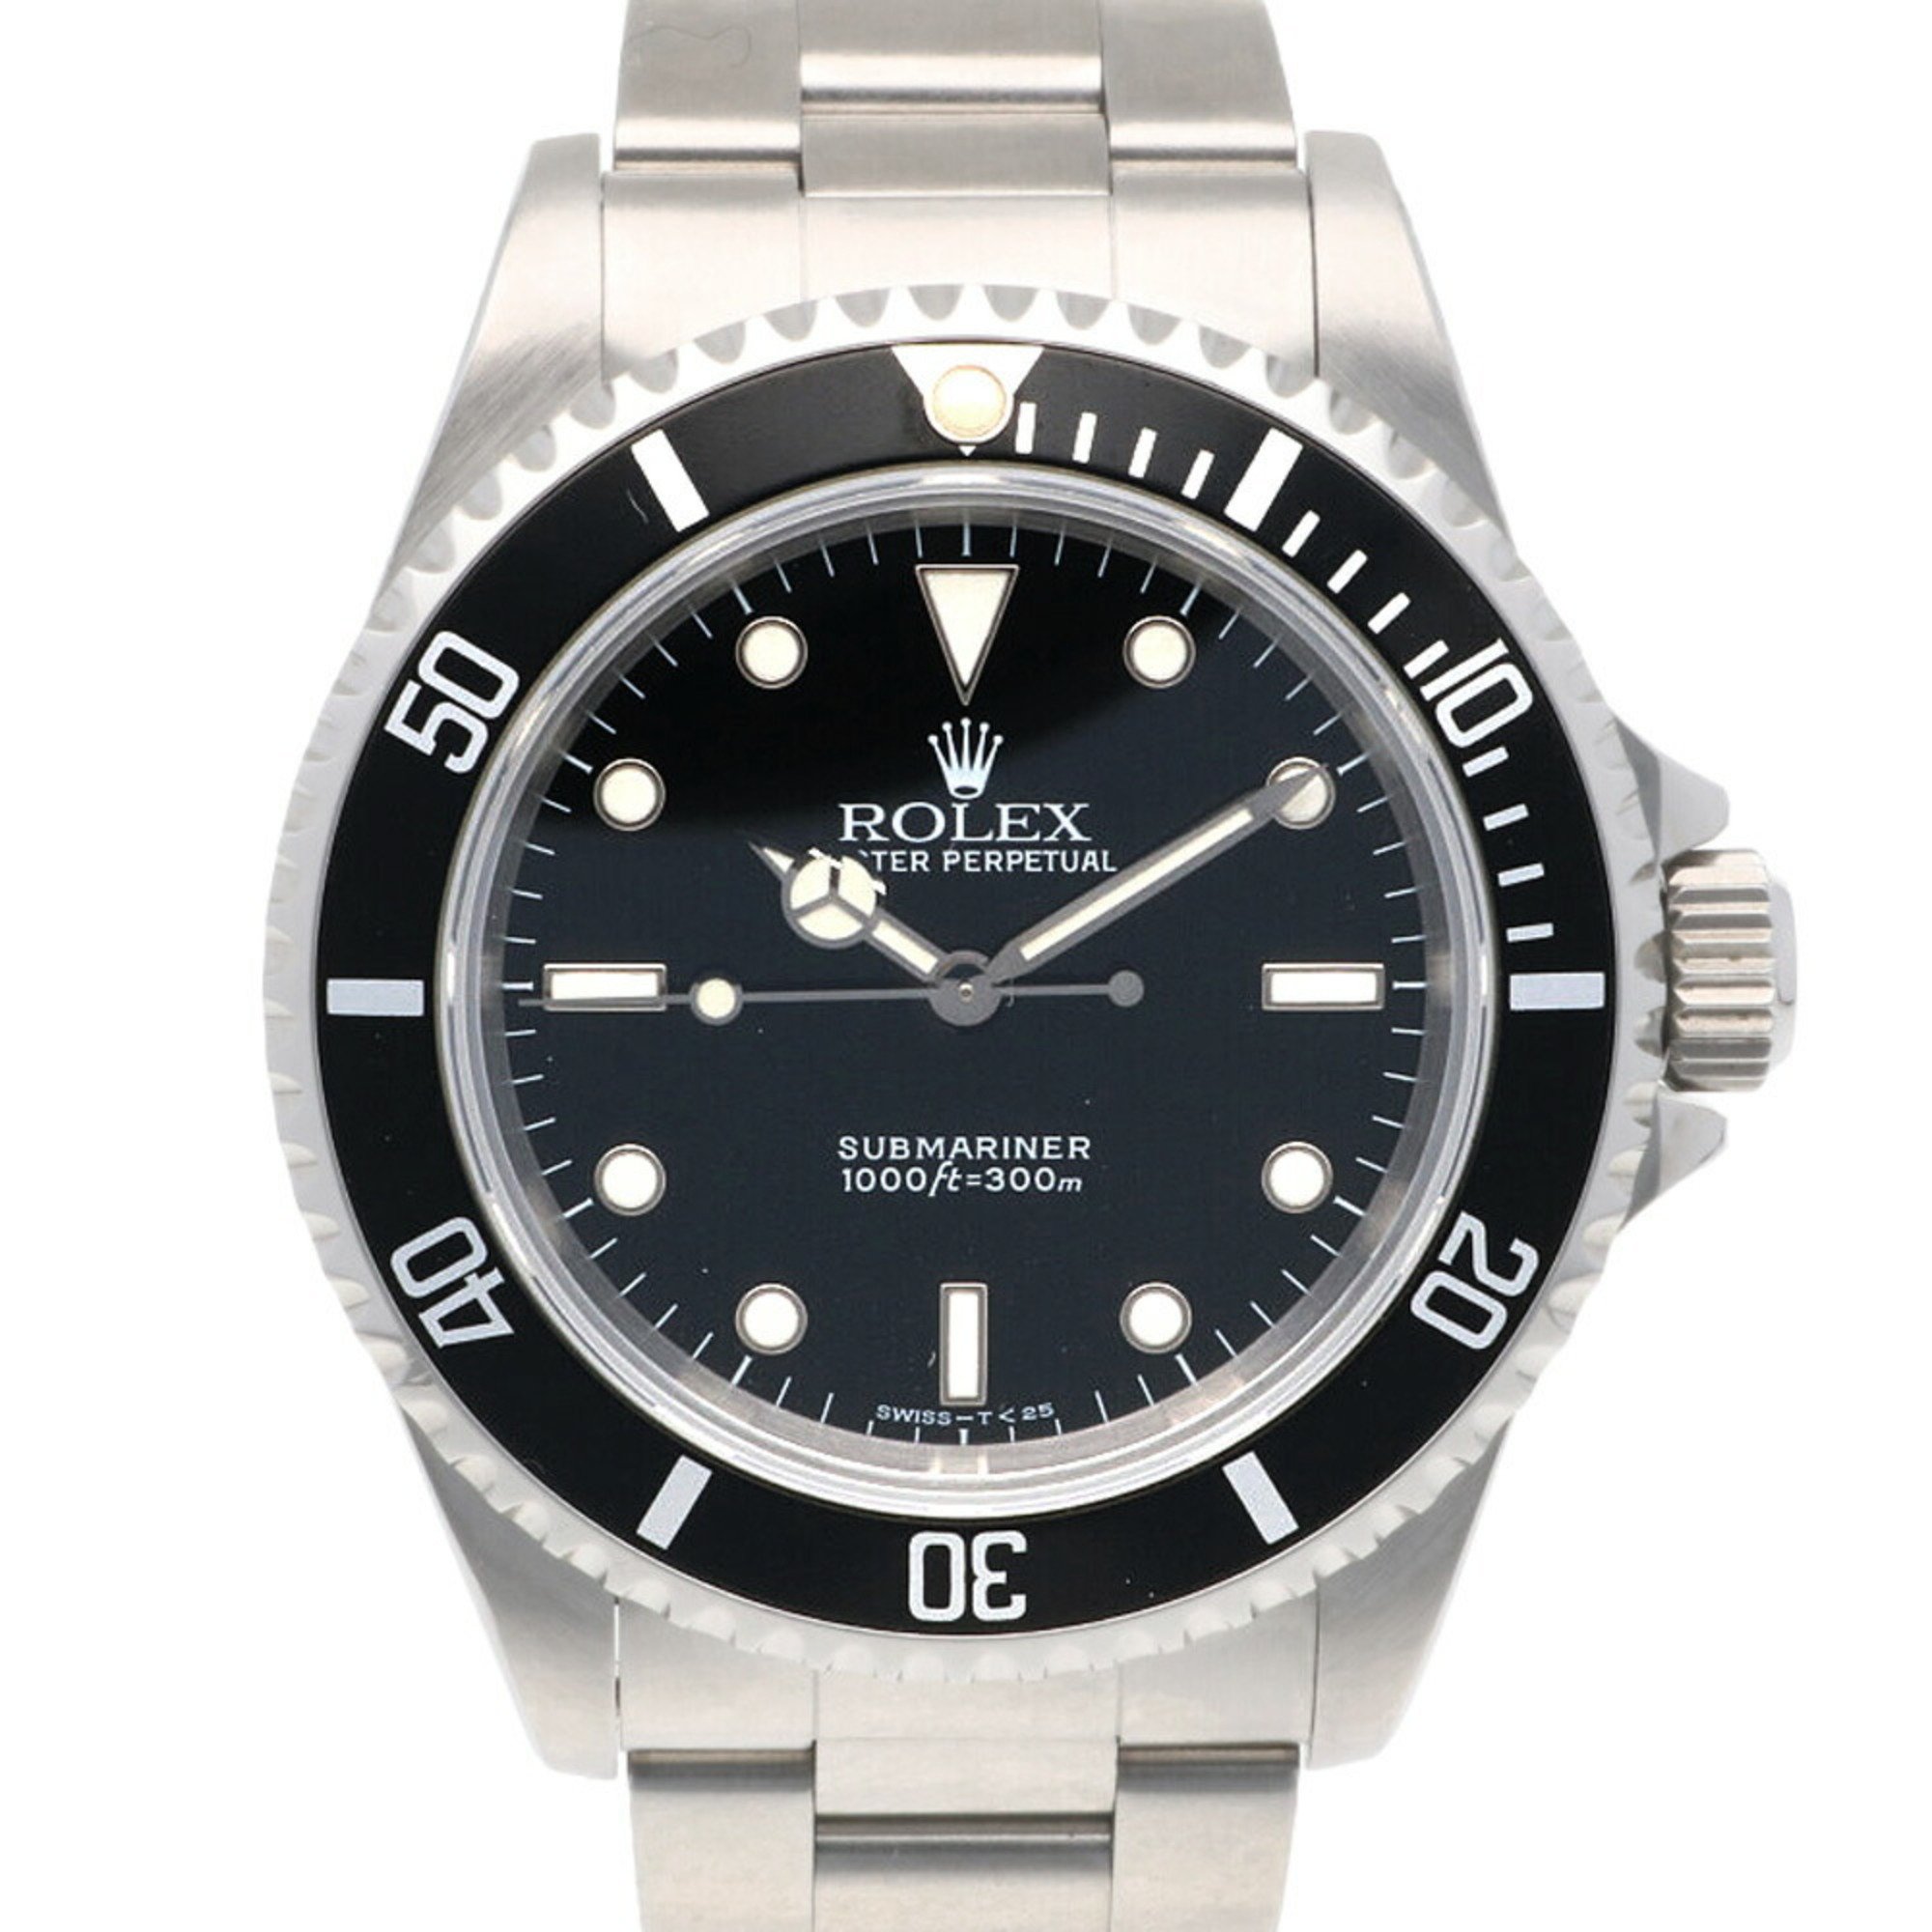 Rolex Submariner Oyster Perpetual Watch Stainless Steel 14060 Automatic Men's ROLEX T Number 1996 Overhauled RWA10000000116613